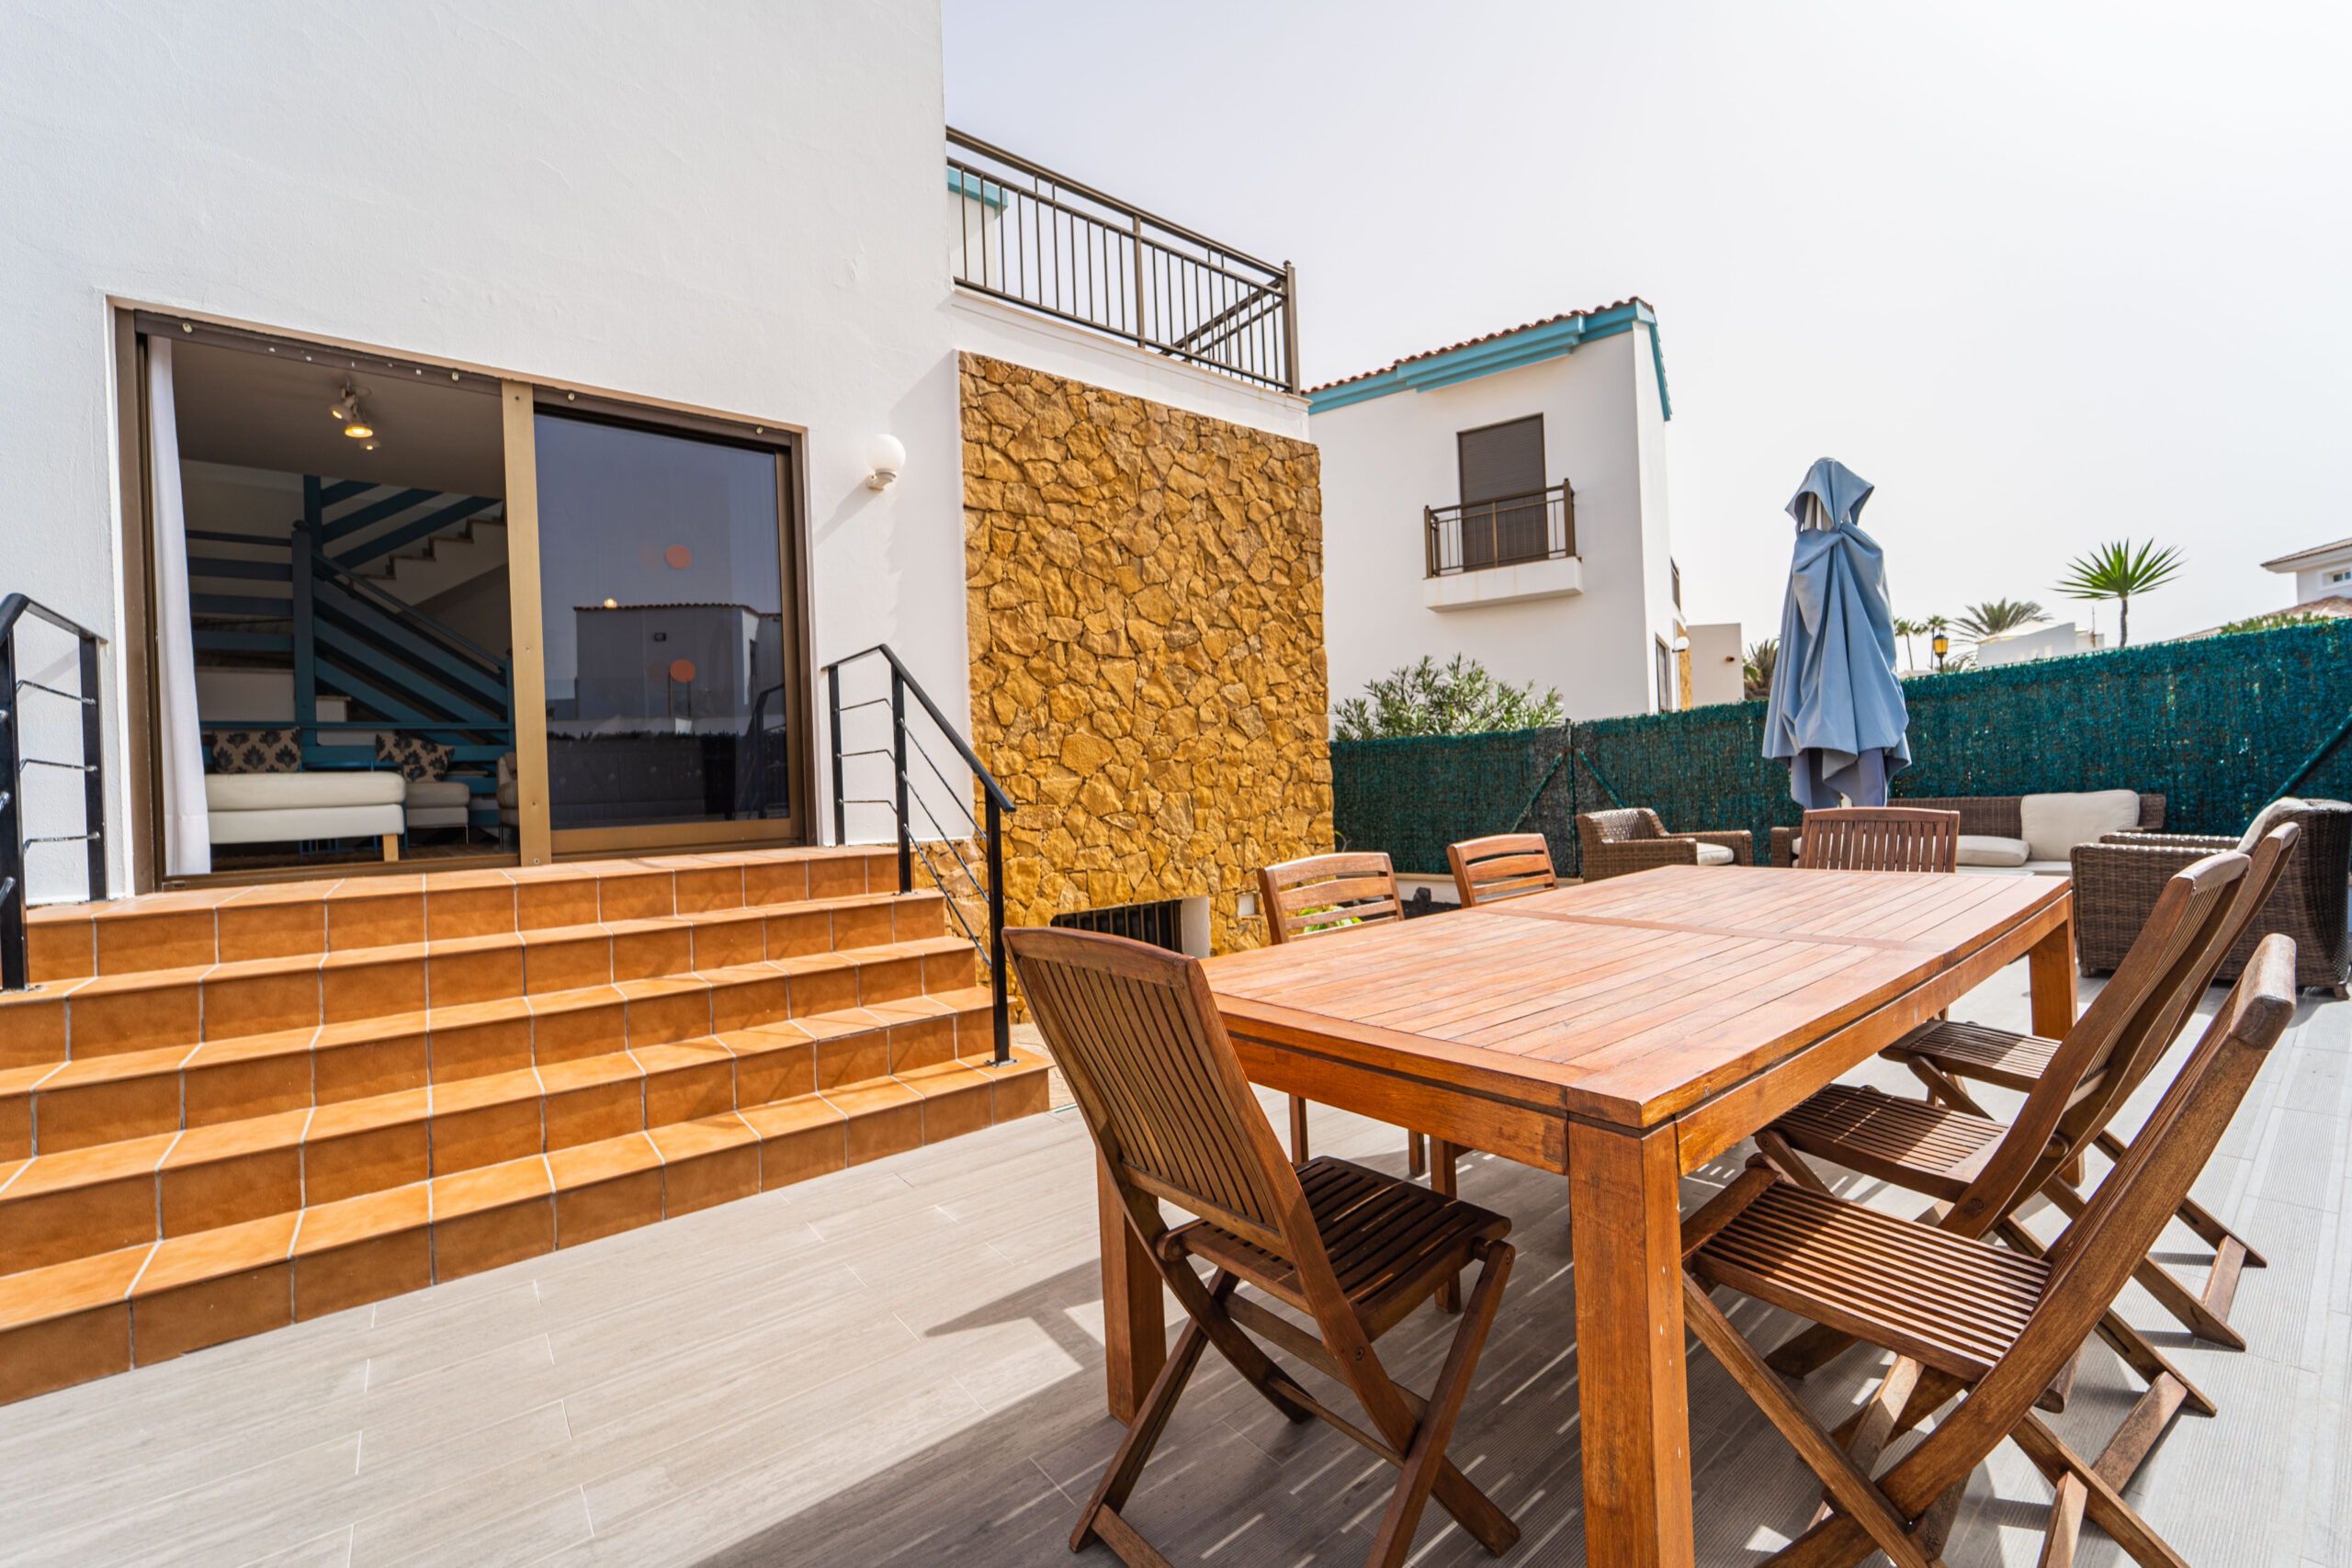 Increase the value of your property in Fuerteventura